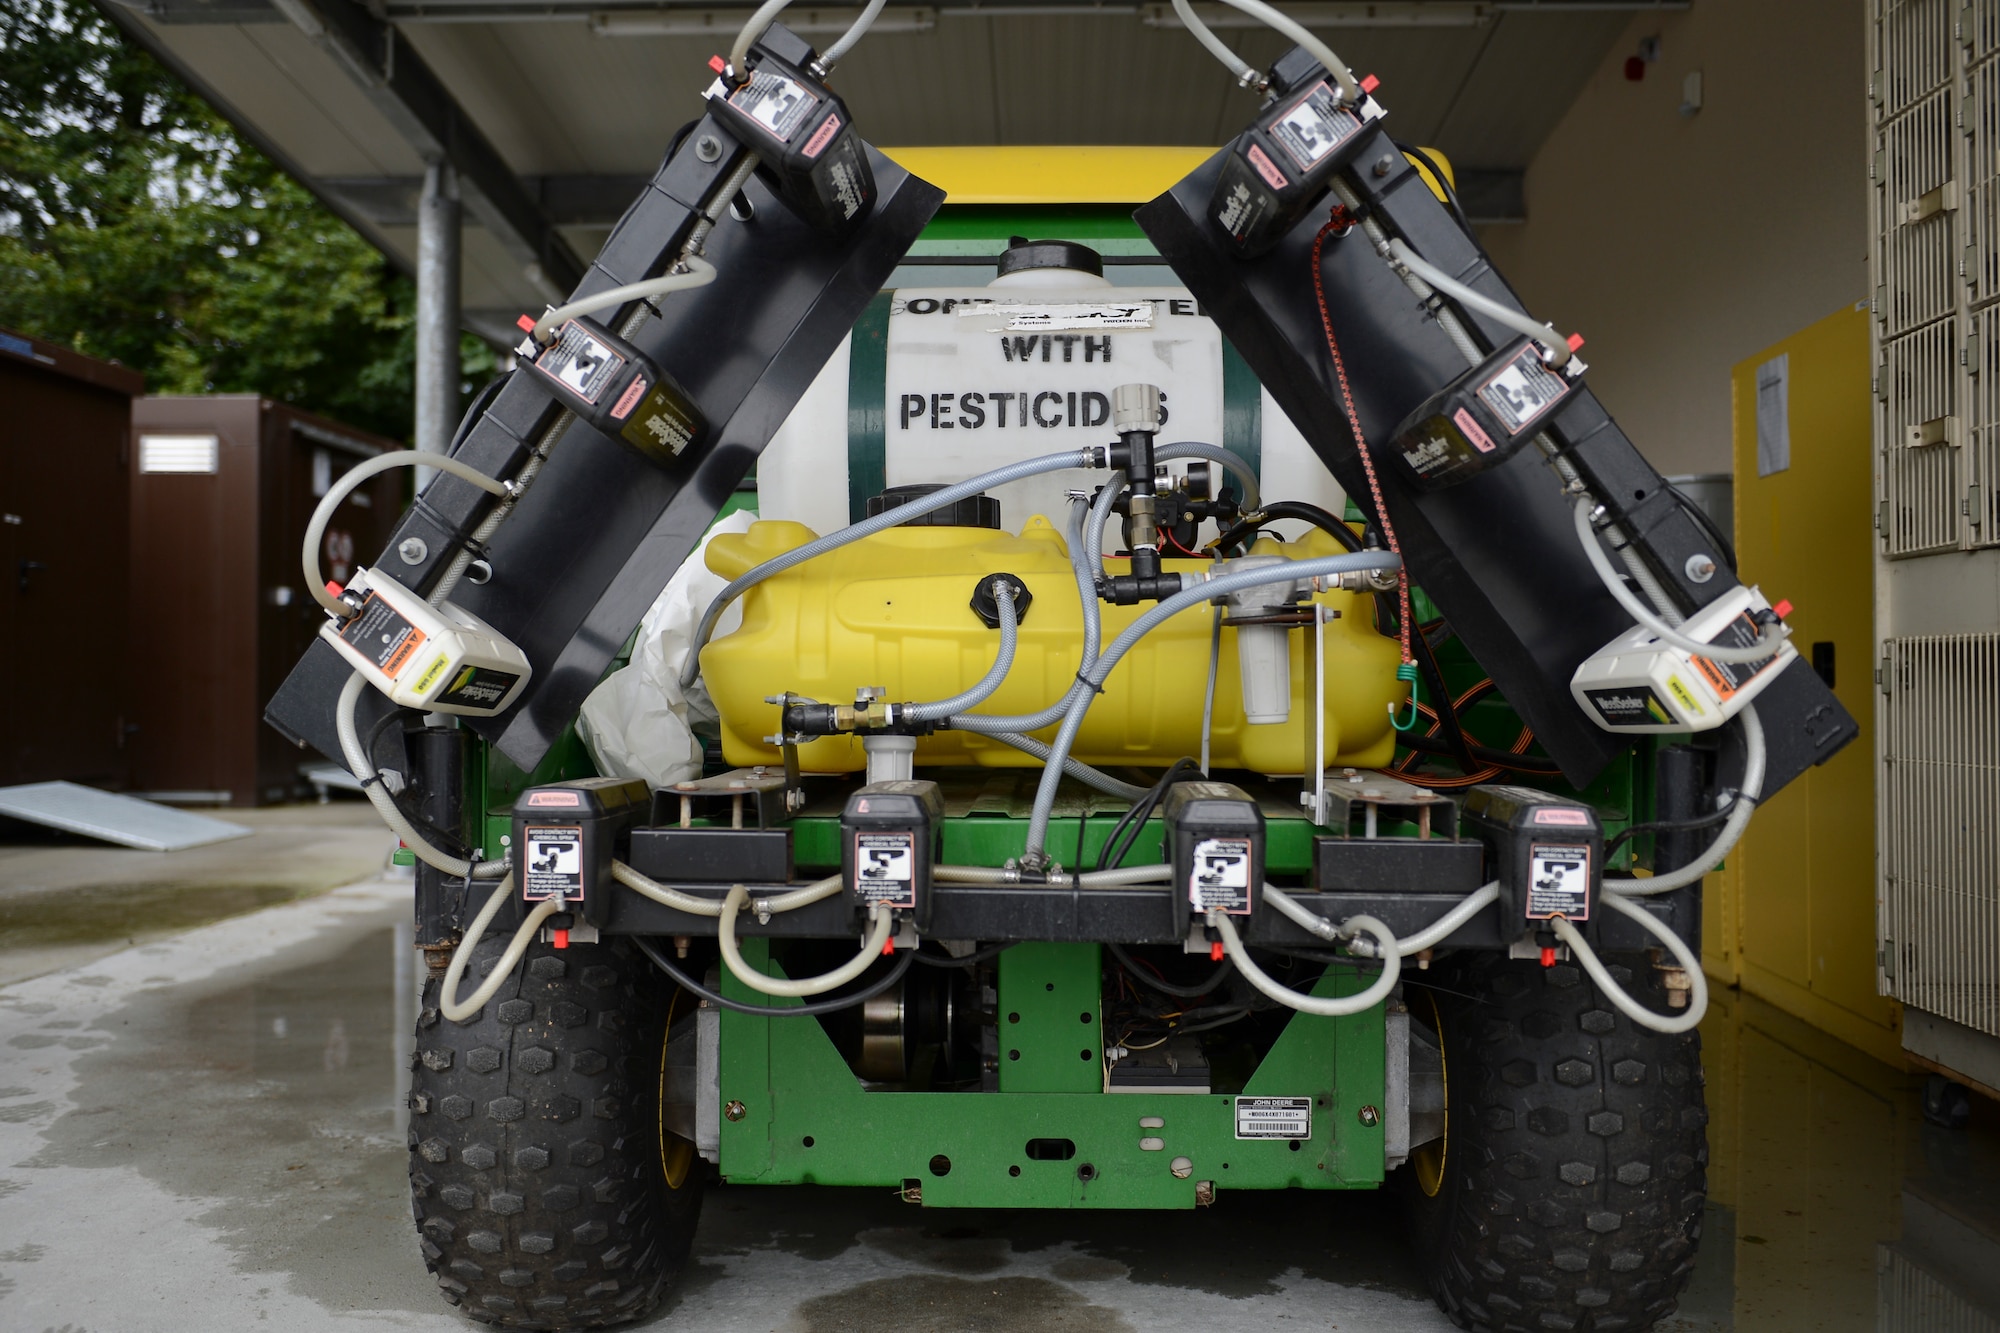 The “weed seeker” is a machine with a few sensors that detect the exact location of weeds while driving over an area. The 786th Civil Engineer Squadron herbicides 2.4 million square yards on the flightline, protecting 28 aircraft worth about $21 billion. (U.S. Air Force photo/Airman 1st Class Michael Stuart)